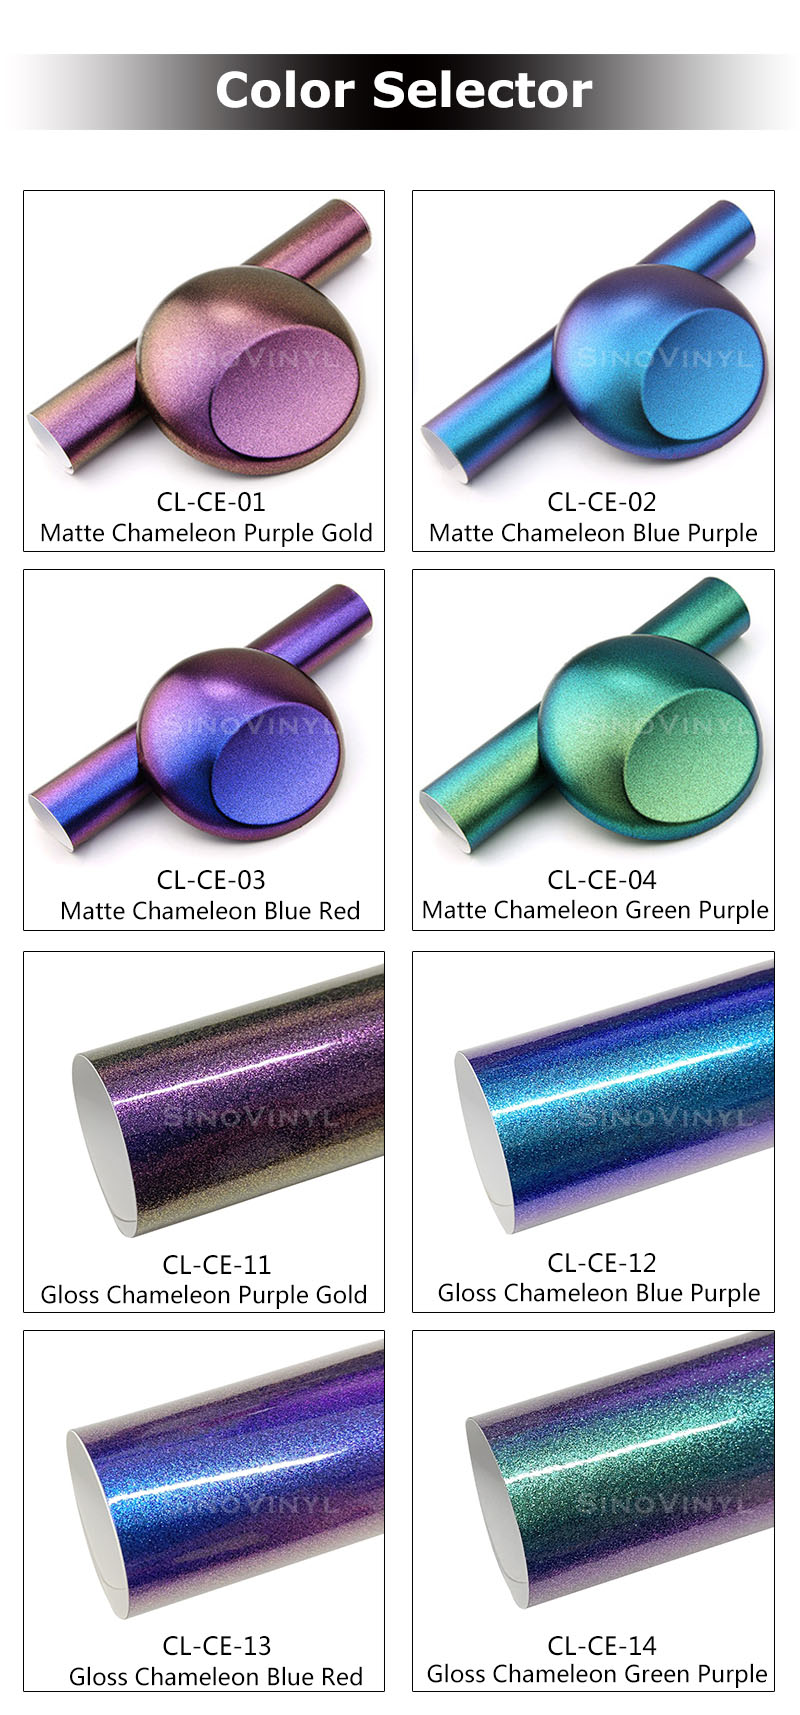 Chameleon Wrap - Selection of Color